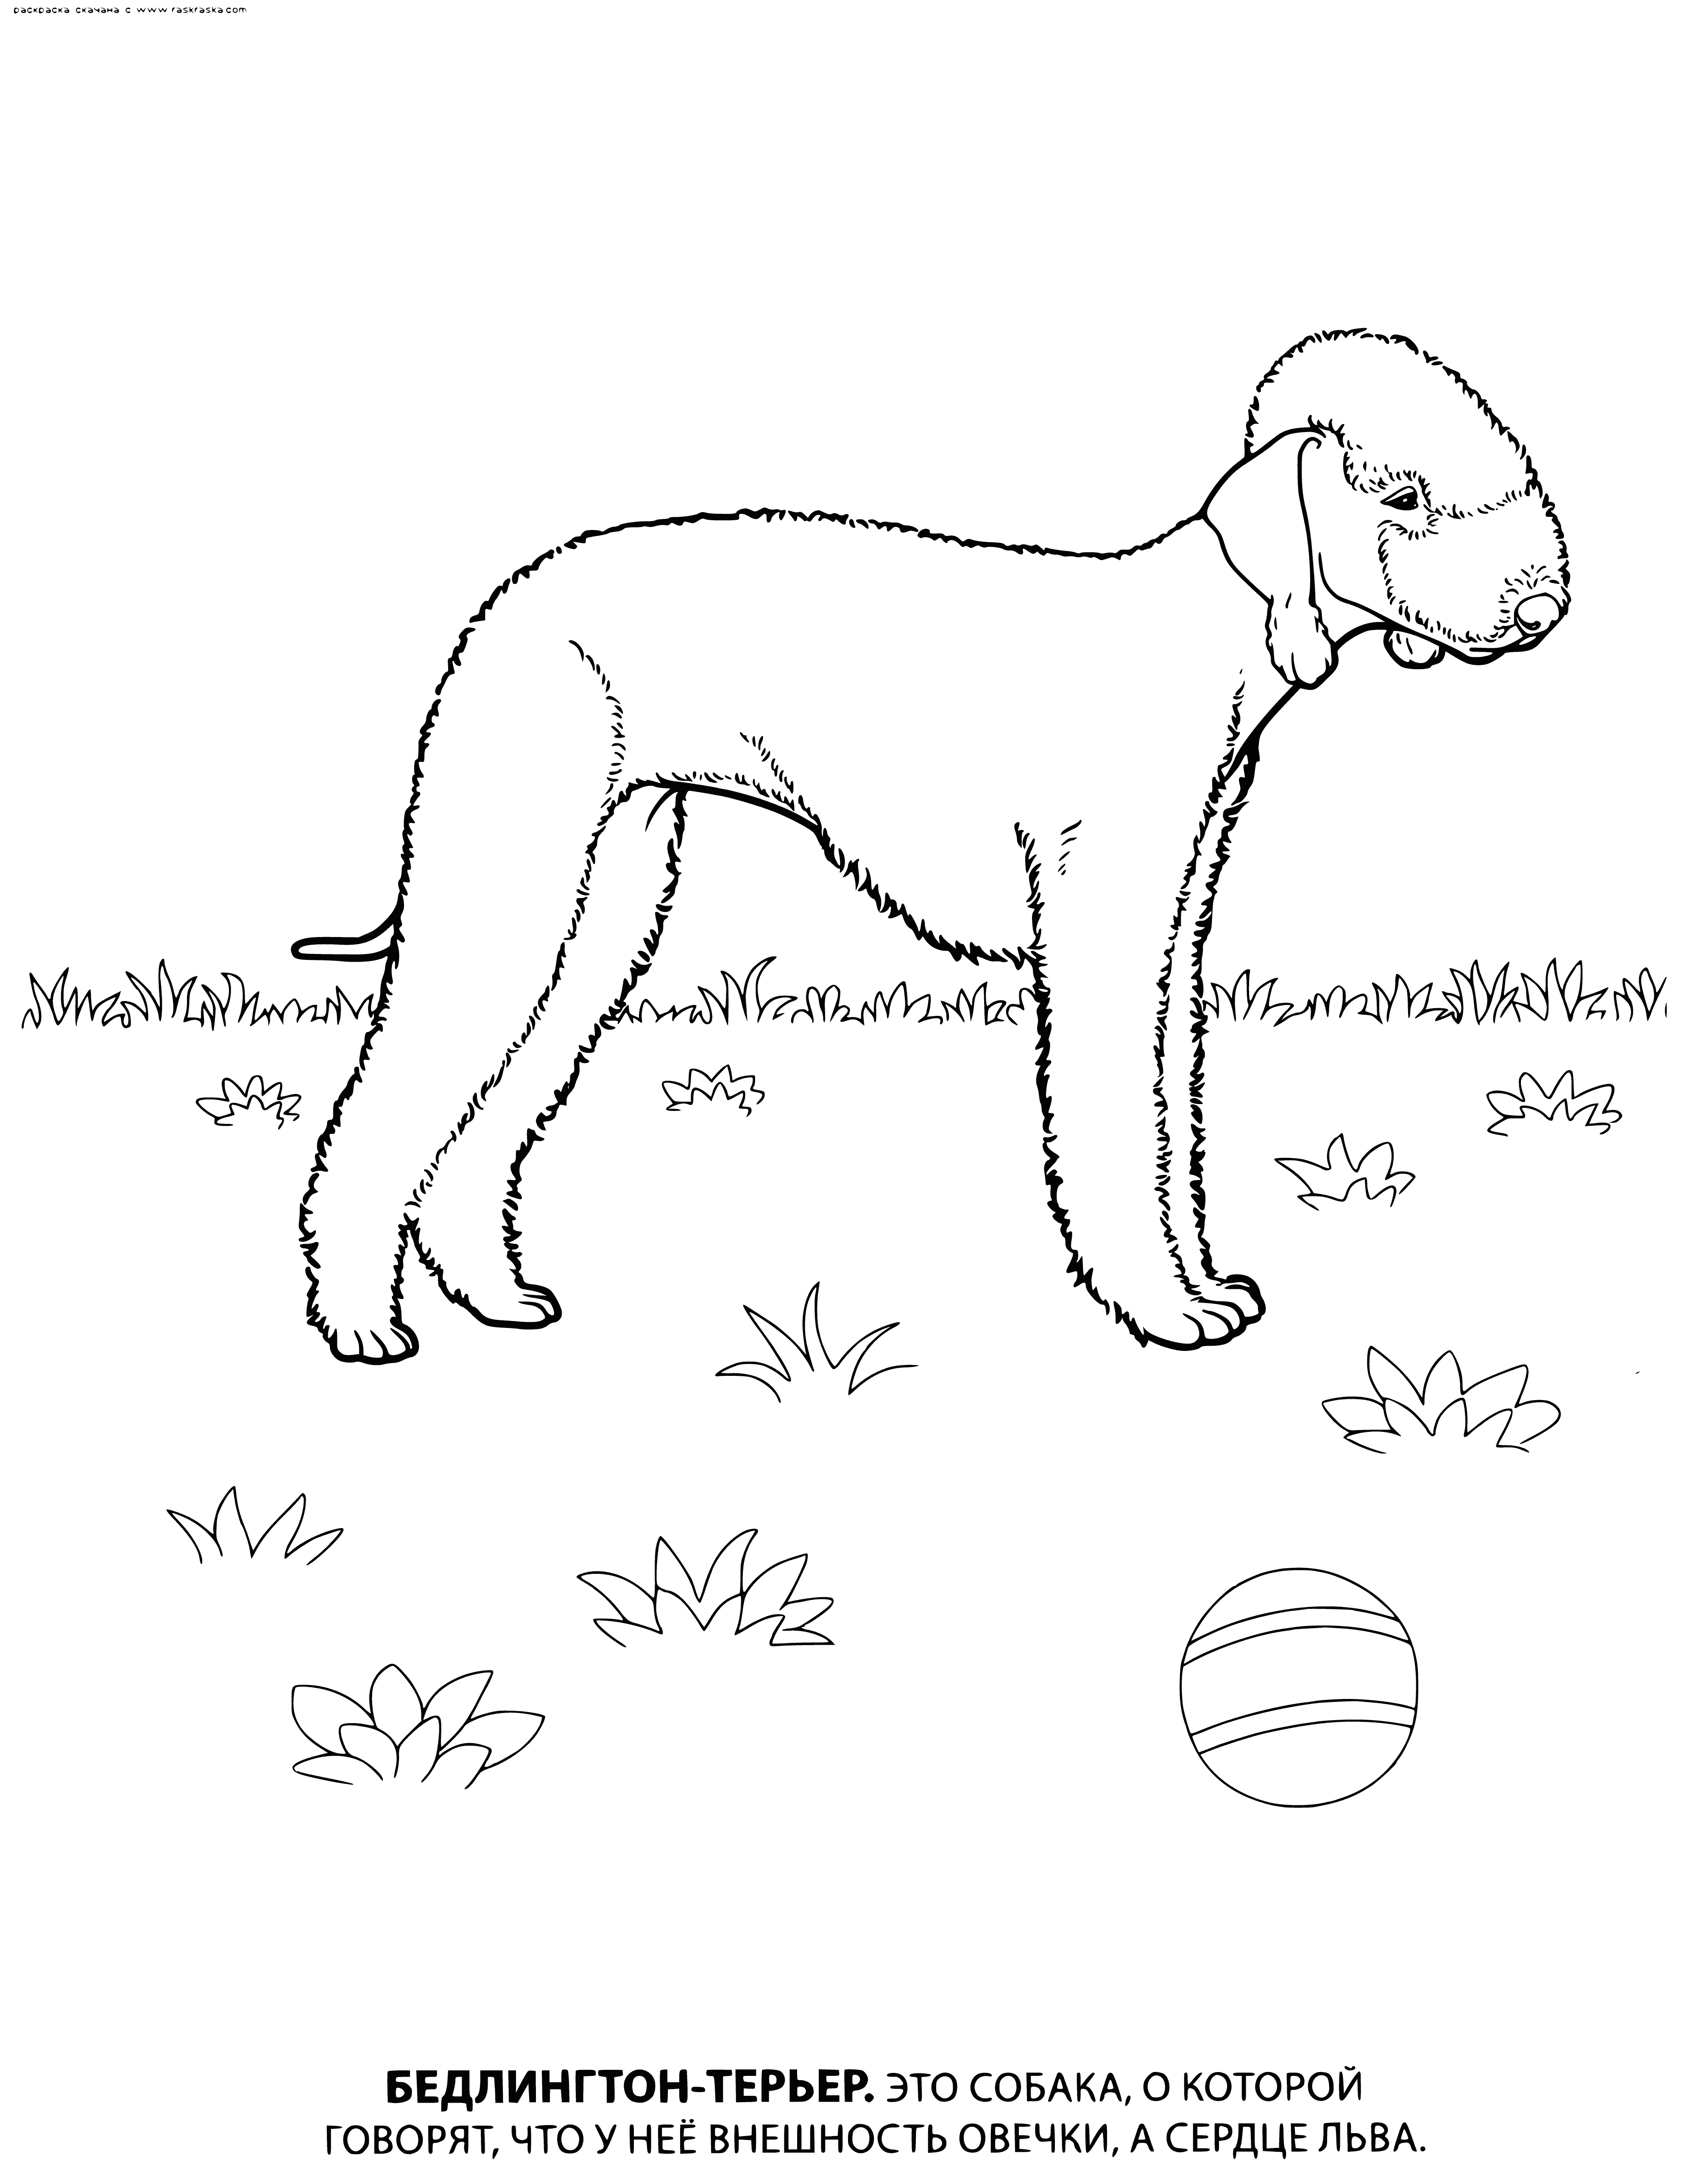 coloring page: Small, muscular dog w/ distinctive pear-shaped head. Short, dense coat in blue/liver. Active, loyal, affectionate, intelligent & easy to train – Bedlington Terrier.